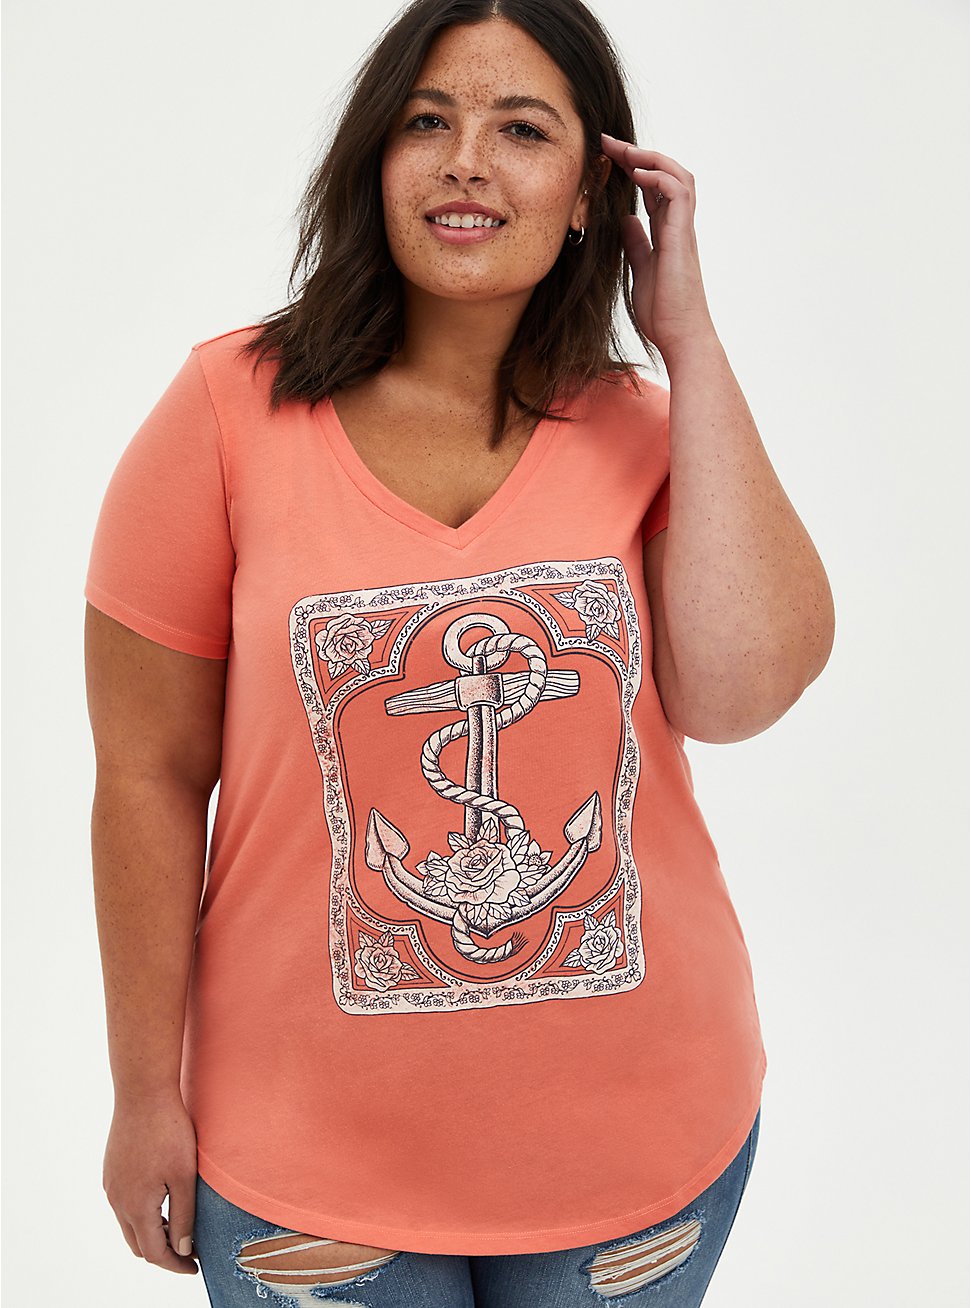 Classic Fit - Anchor Rose Peach V-Neck Crew Tee, FUSION CORAL, hi-res